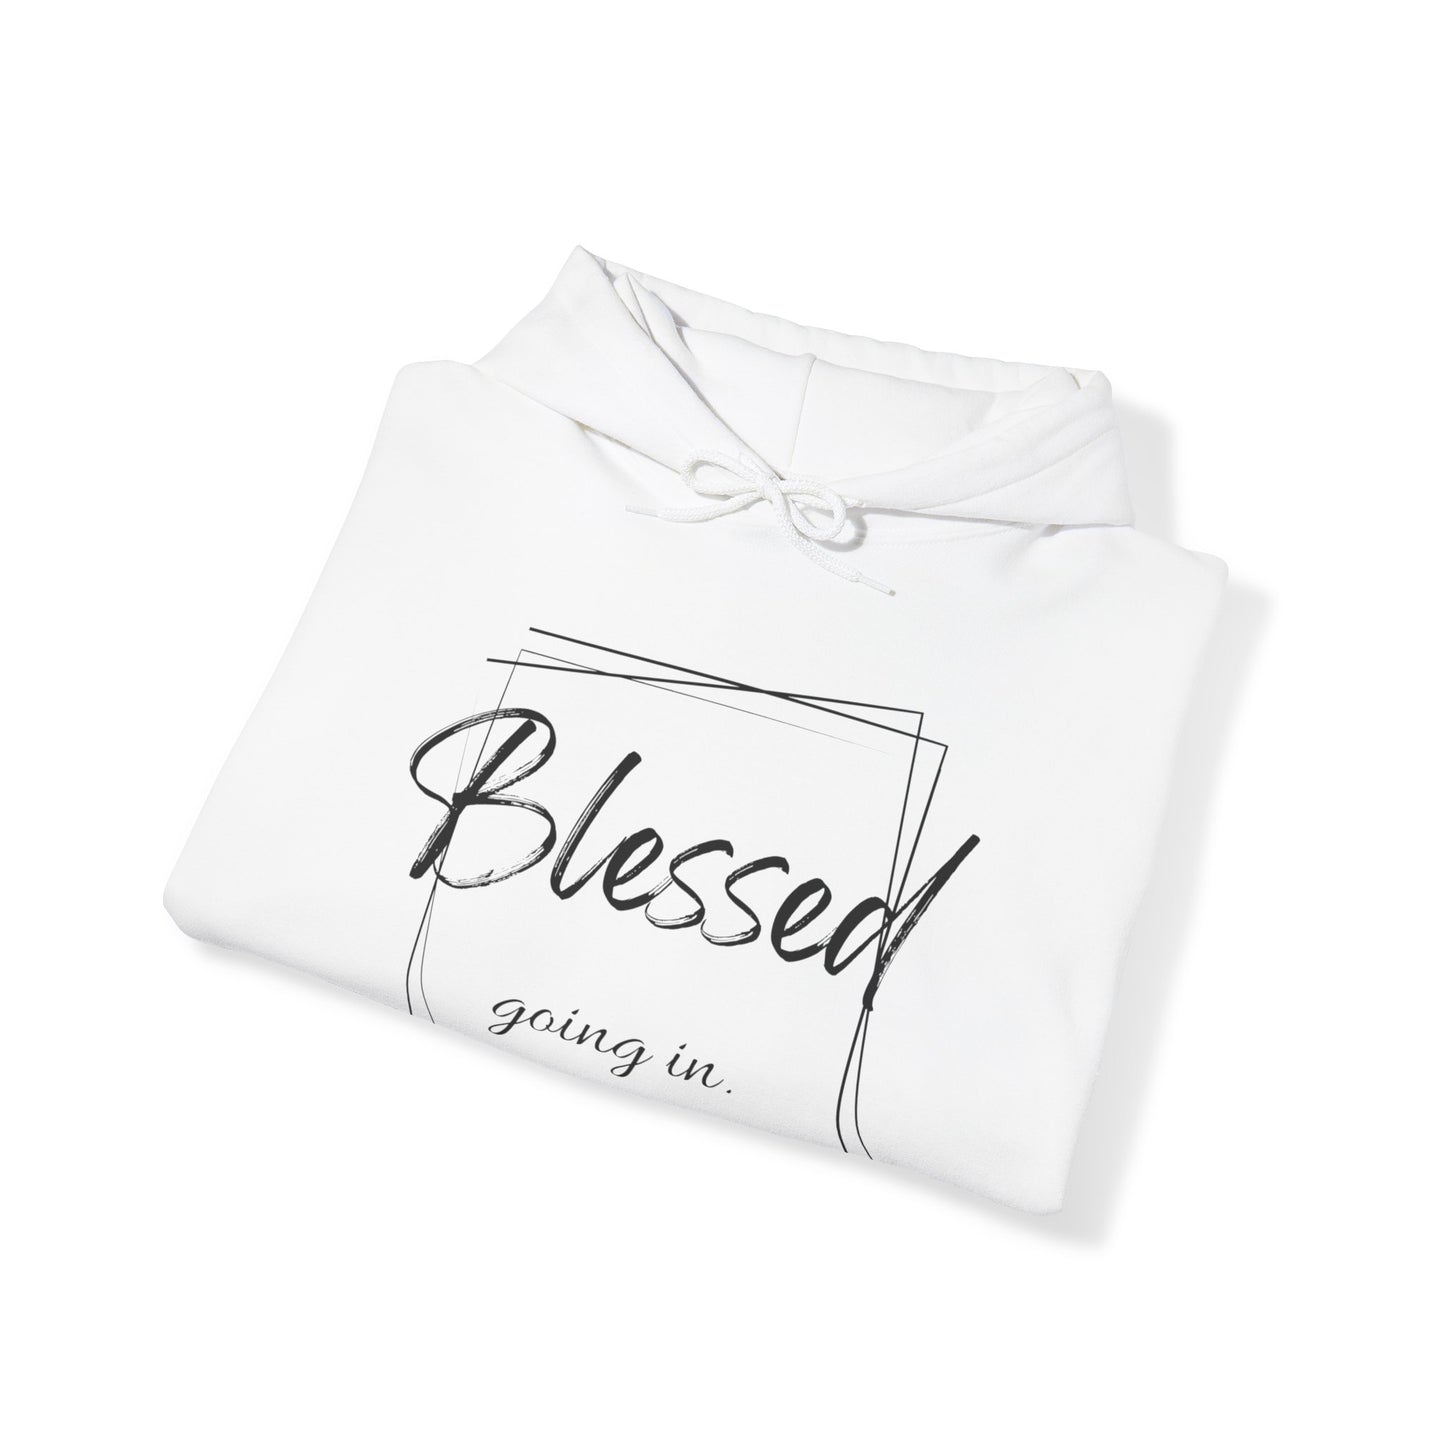 Blessed Going In, Blessed Going Out - Unisex Hooded Sweatshirt